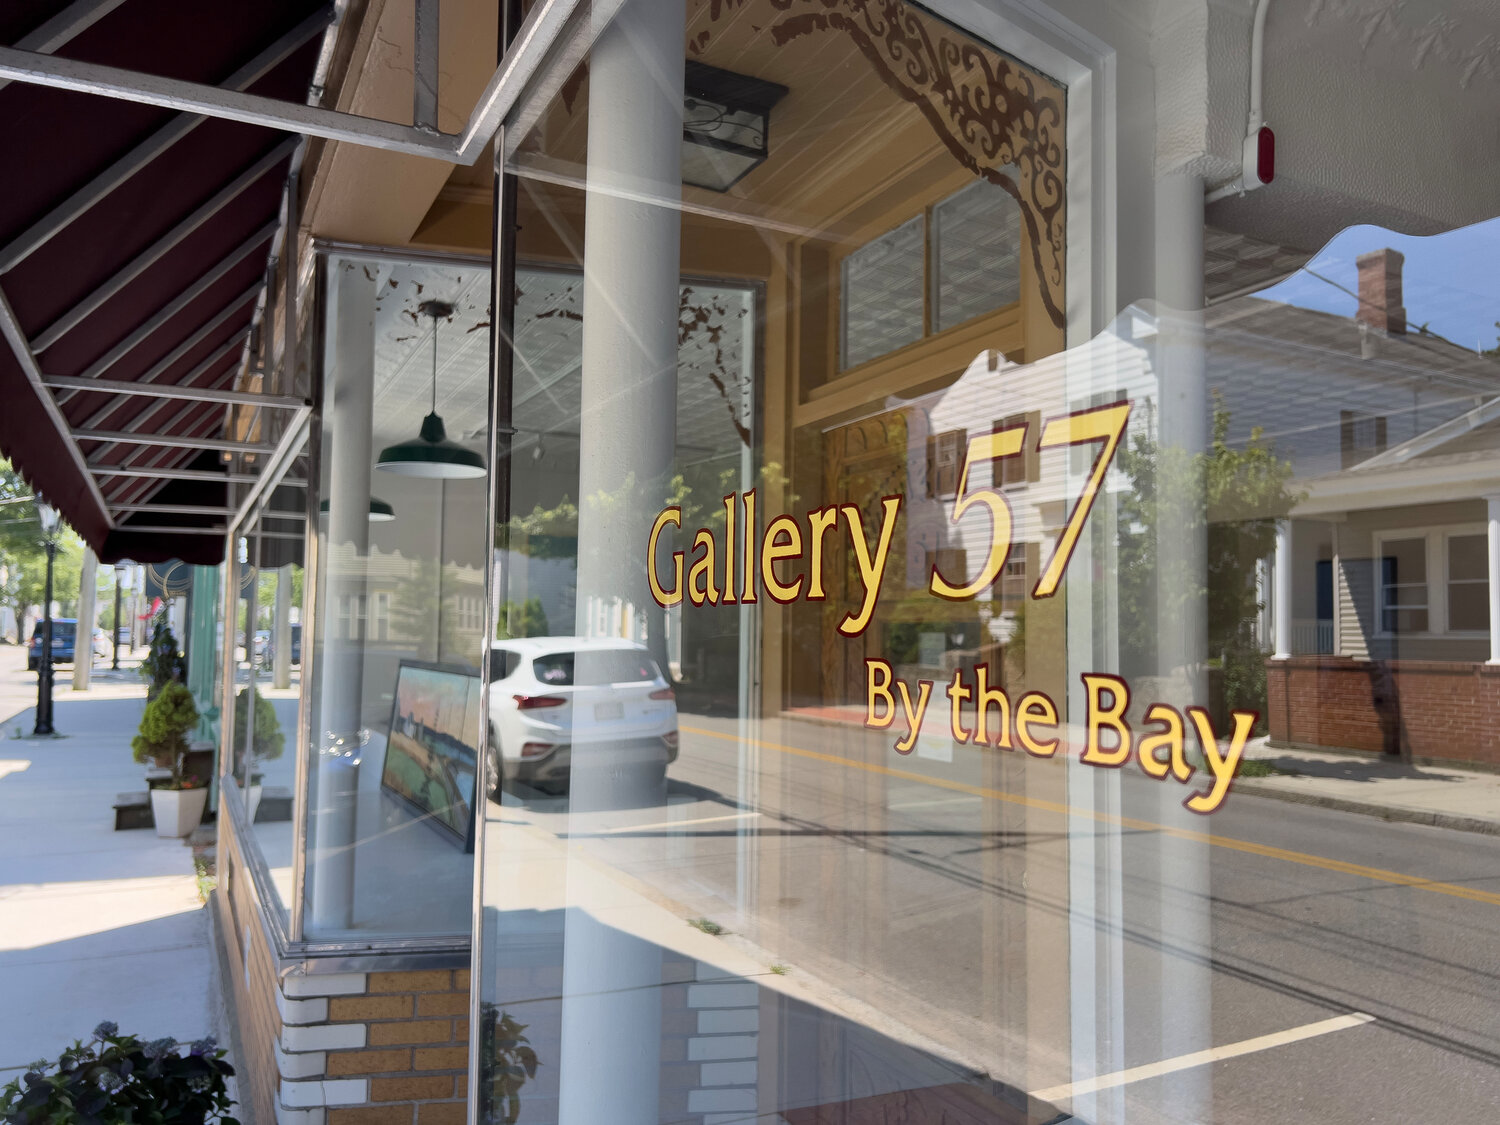 The gallery is located at 57 Water St. in Warren. It is open Thursday through Saturday, 12-5 p.m., and Sunday from 12-3 p.m. (or by appointment).